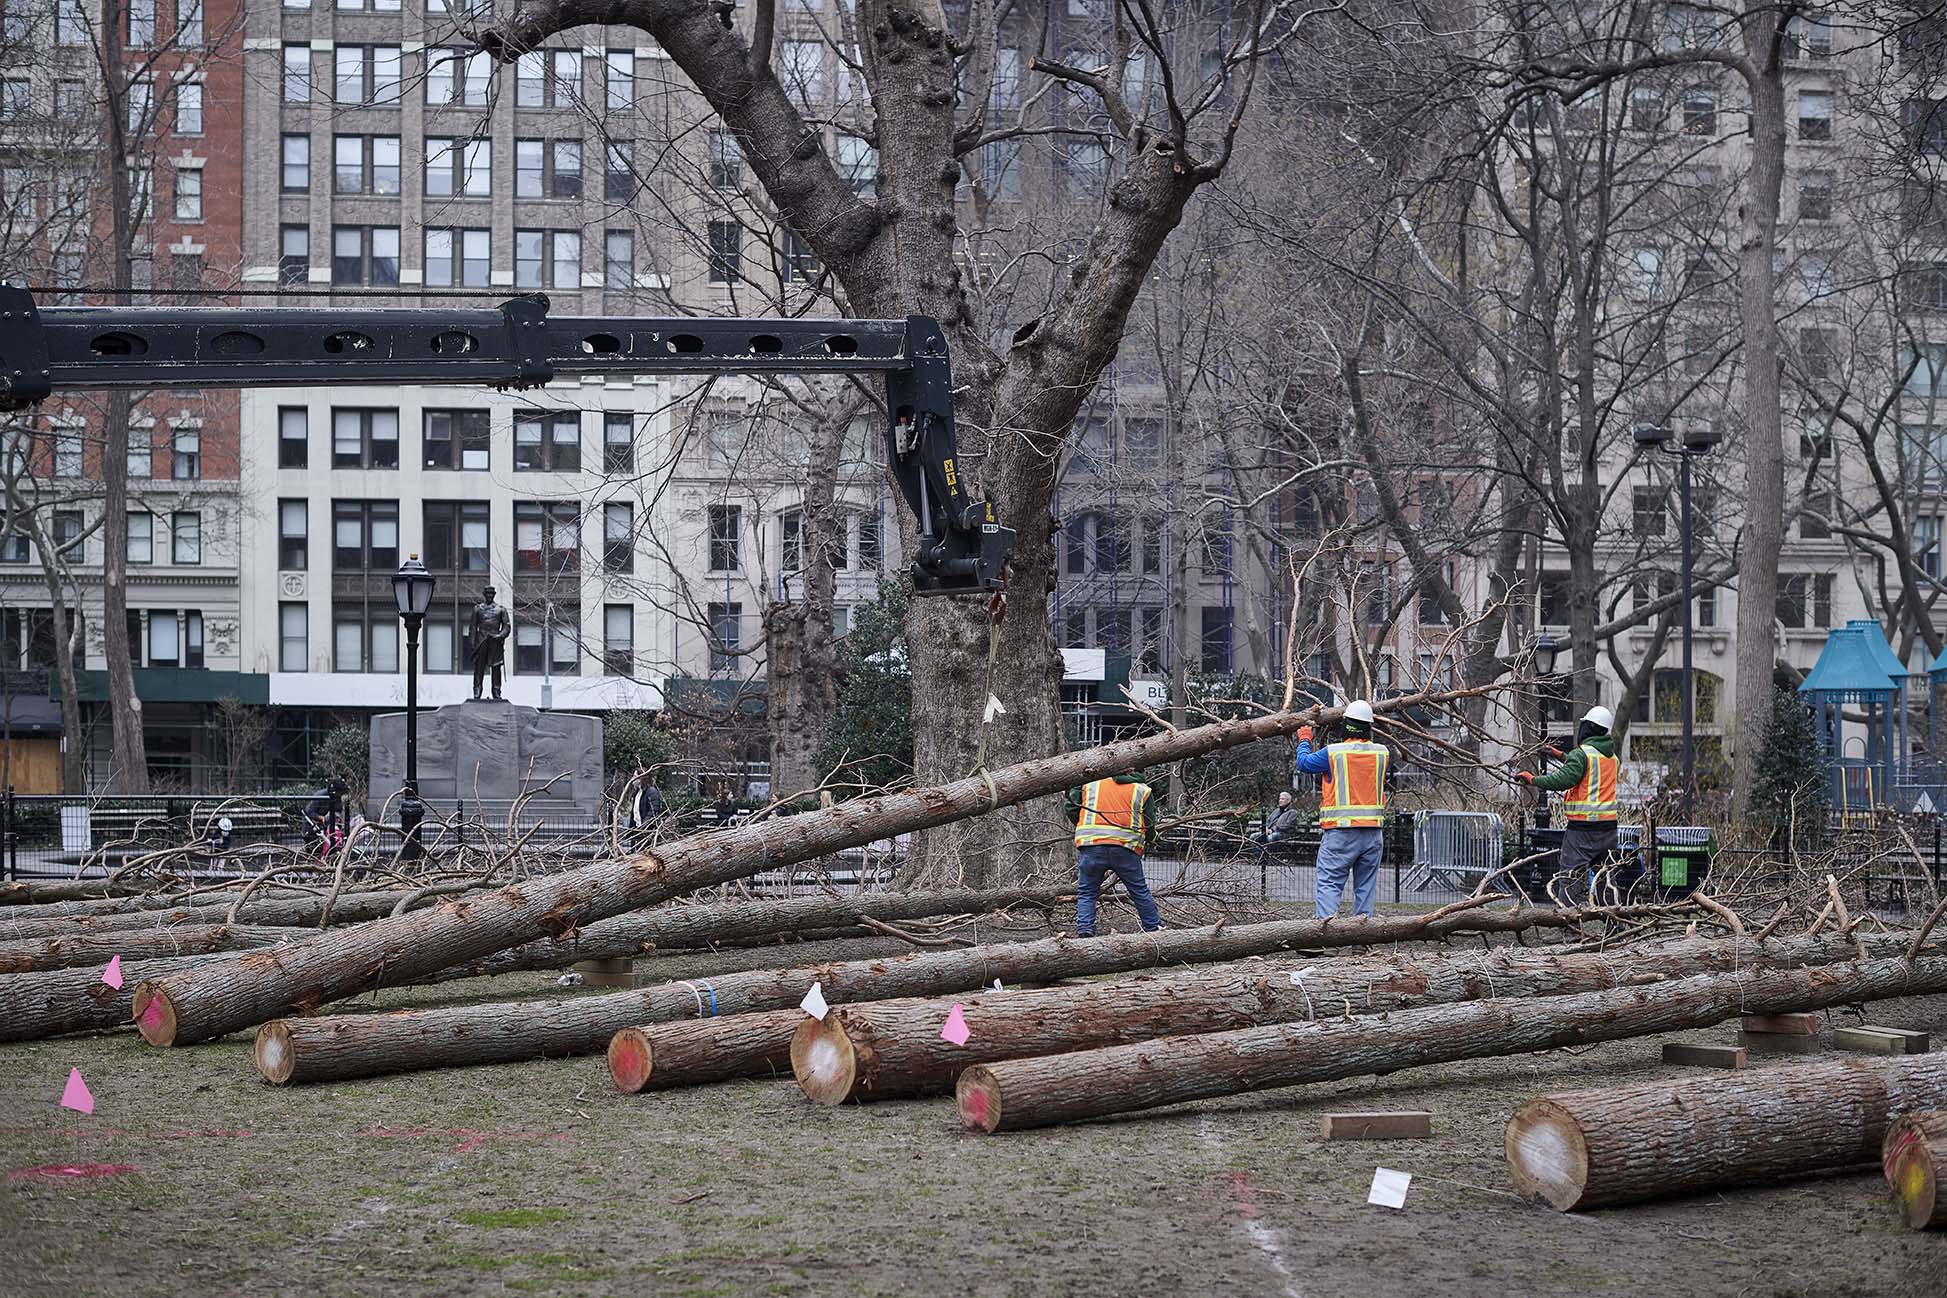 Maya Lin, Installation of <em>Ghost Forest</em> in process in Madison Square Park, 2021. ©Maya Lin 2021. Courtesy of the artist and Madison Square Park Conservancy. Photo: Andy Romer.